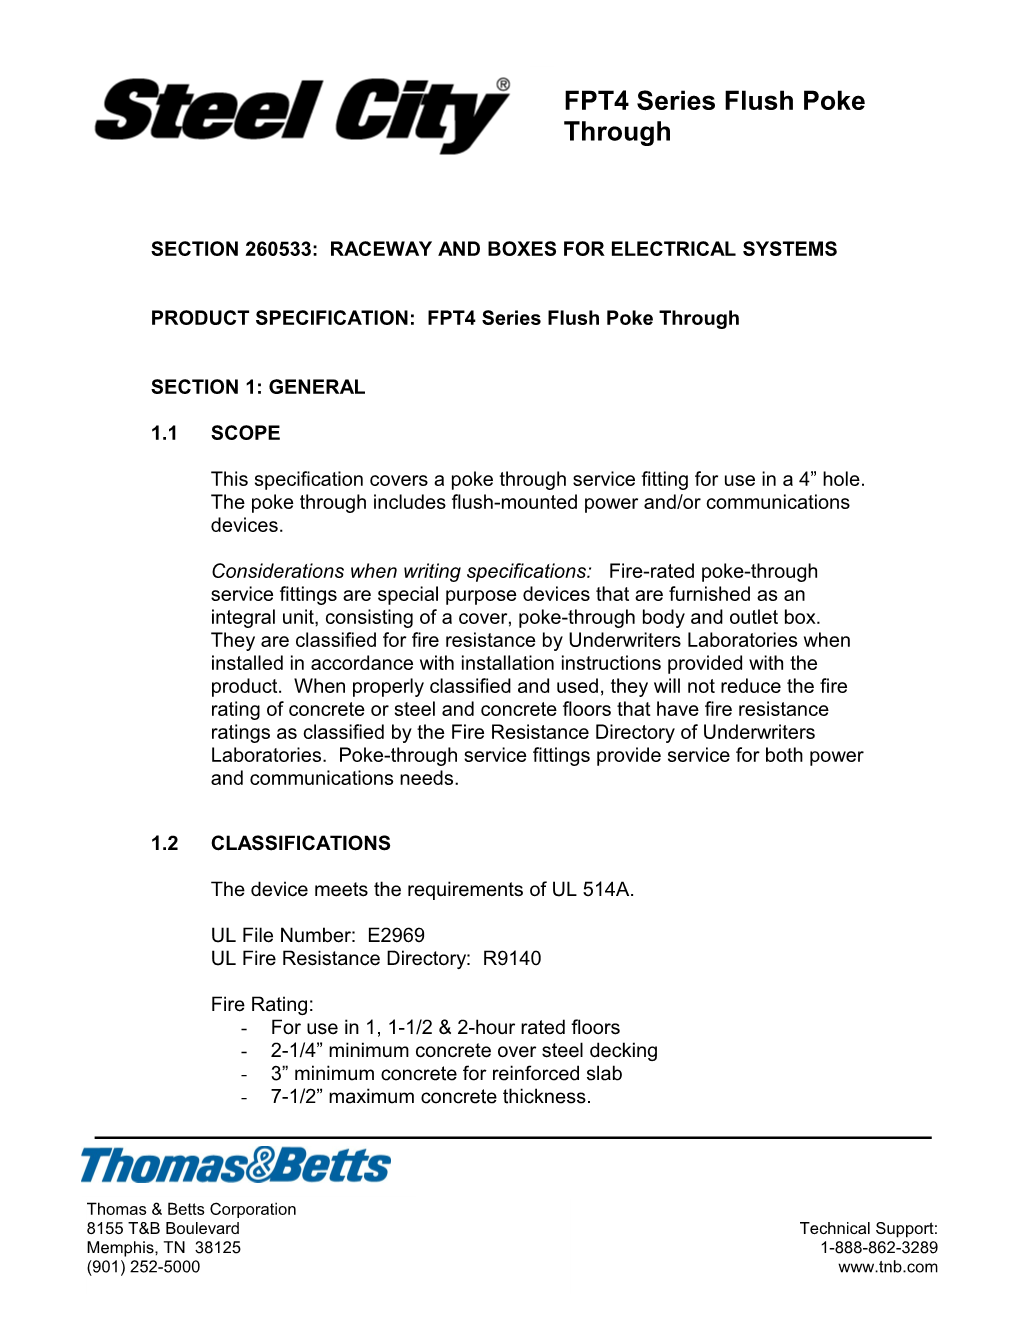 Section 260533: Raceway and Boxes for Electrical Systems